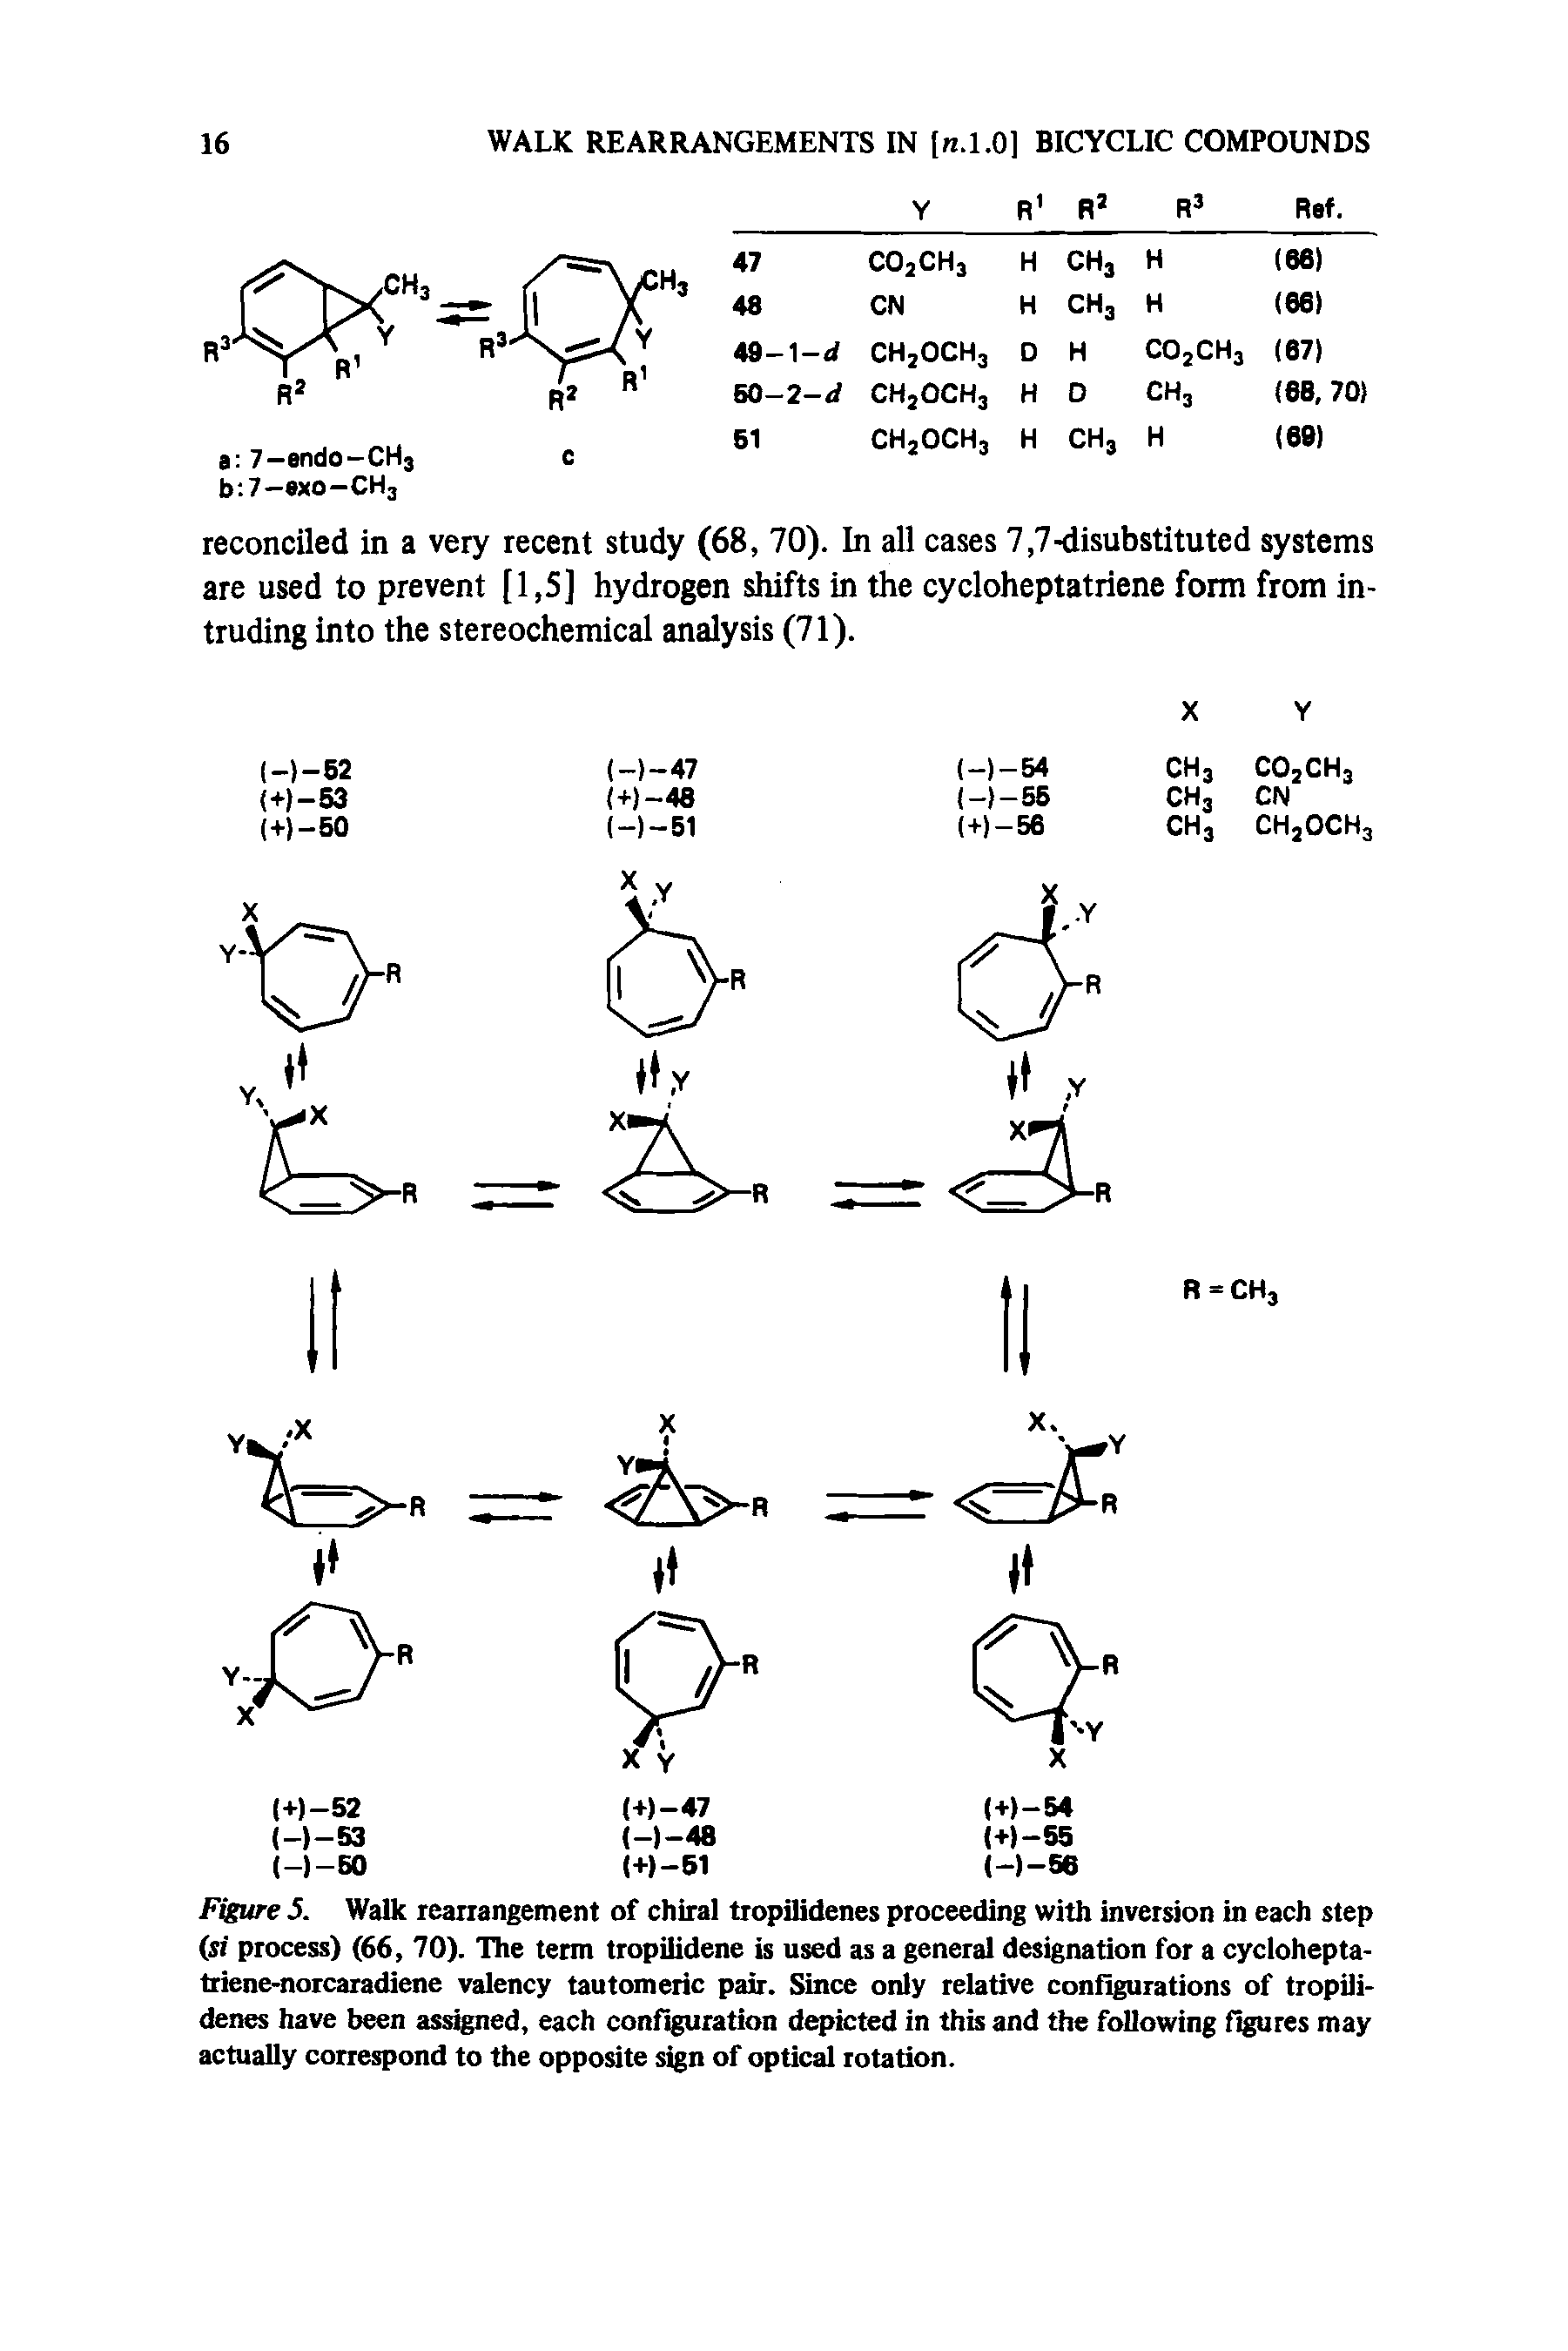 Figure 5. Walk rearrangement of chiral tropilidenes proceeding with inversion in each step (si process) (66, 70). The term tropilidene is used as a general designation for a cyclohepta-triene-norcaradiene valency tautomeric pair. Since only relative configurations of tropili-denes have been assigned, each configuration depicted in this and the following figures may actually correspond to the opposite sign of optical rotation.